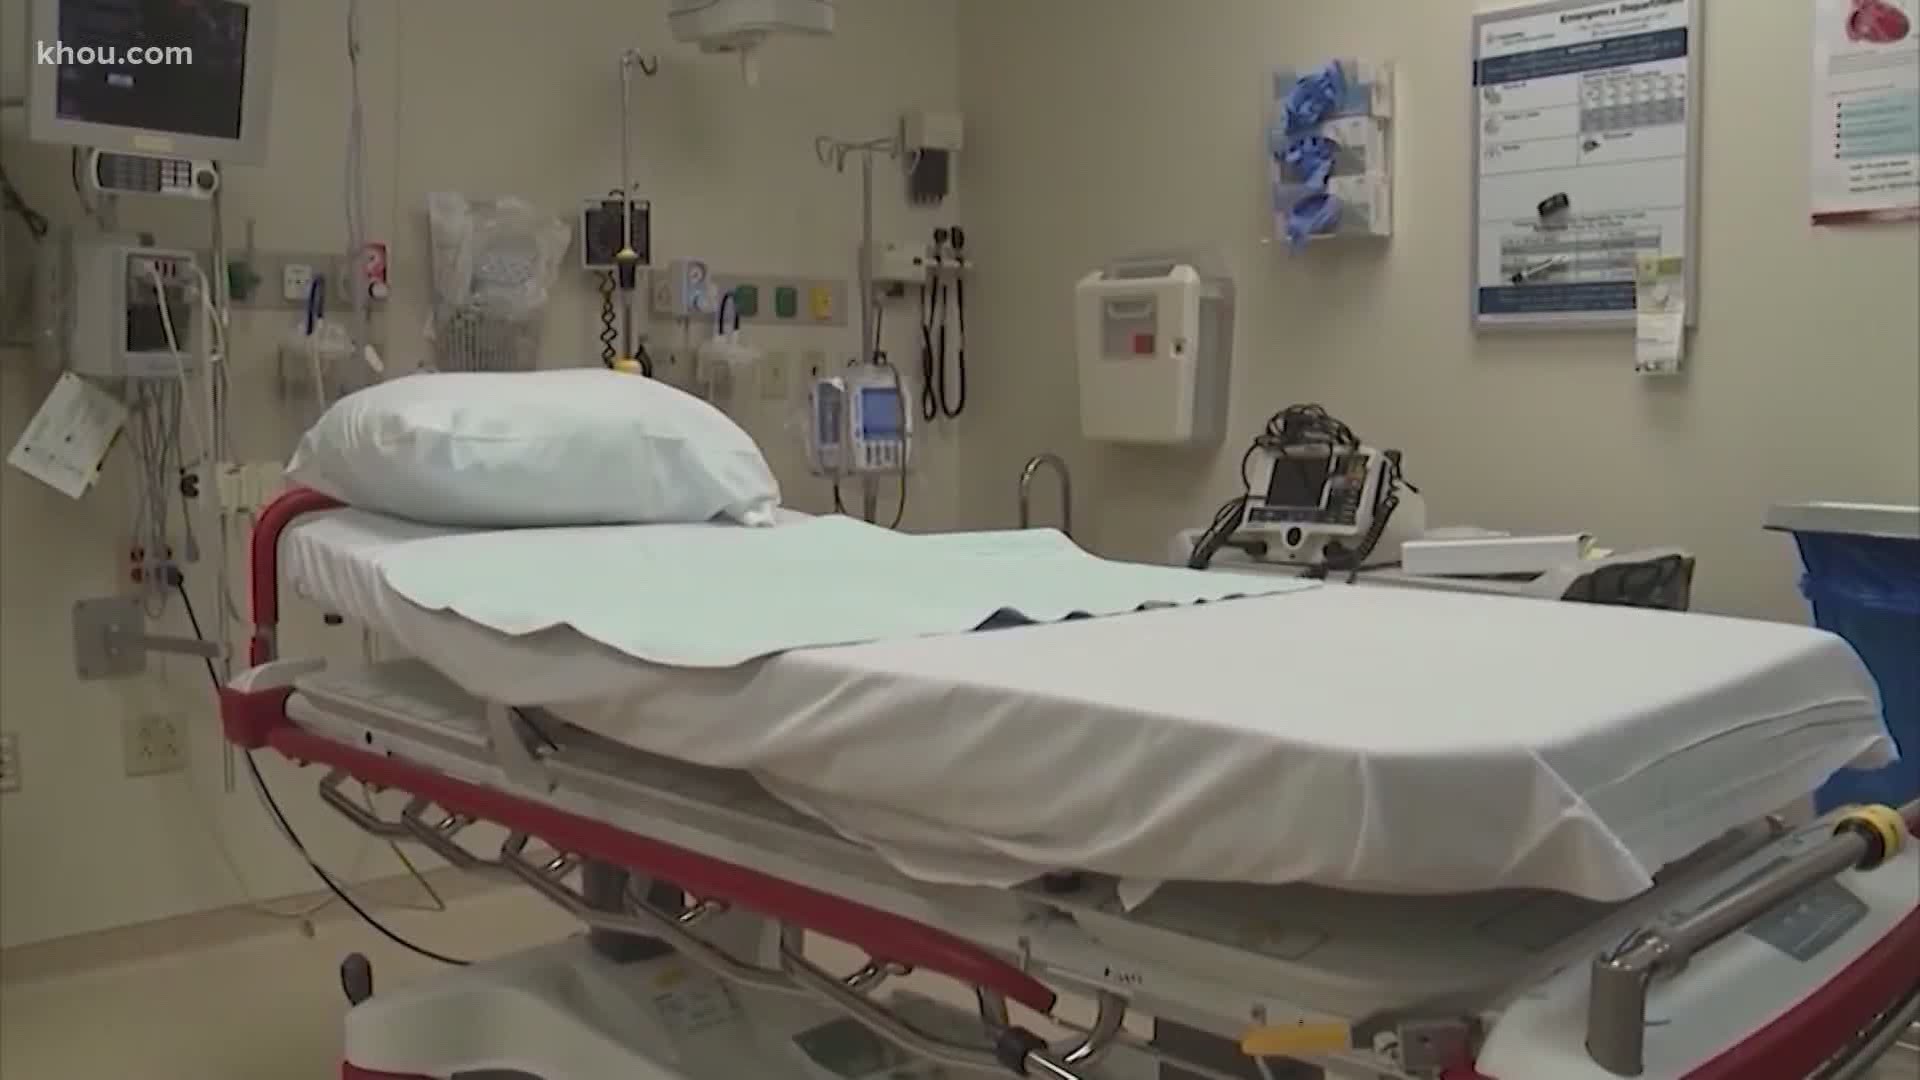 At the Texas Medical Center in Houston, 97 percent of ICU beds were occupied on Tuesday. Twenty-seven percent of those ICU patients have COVID-19.